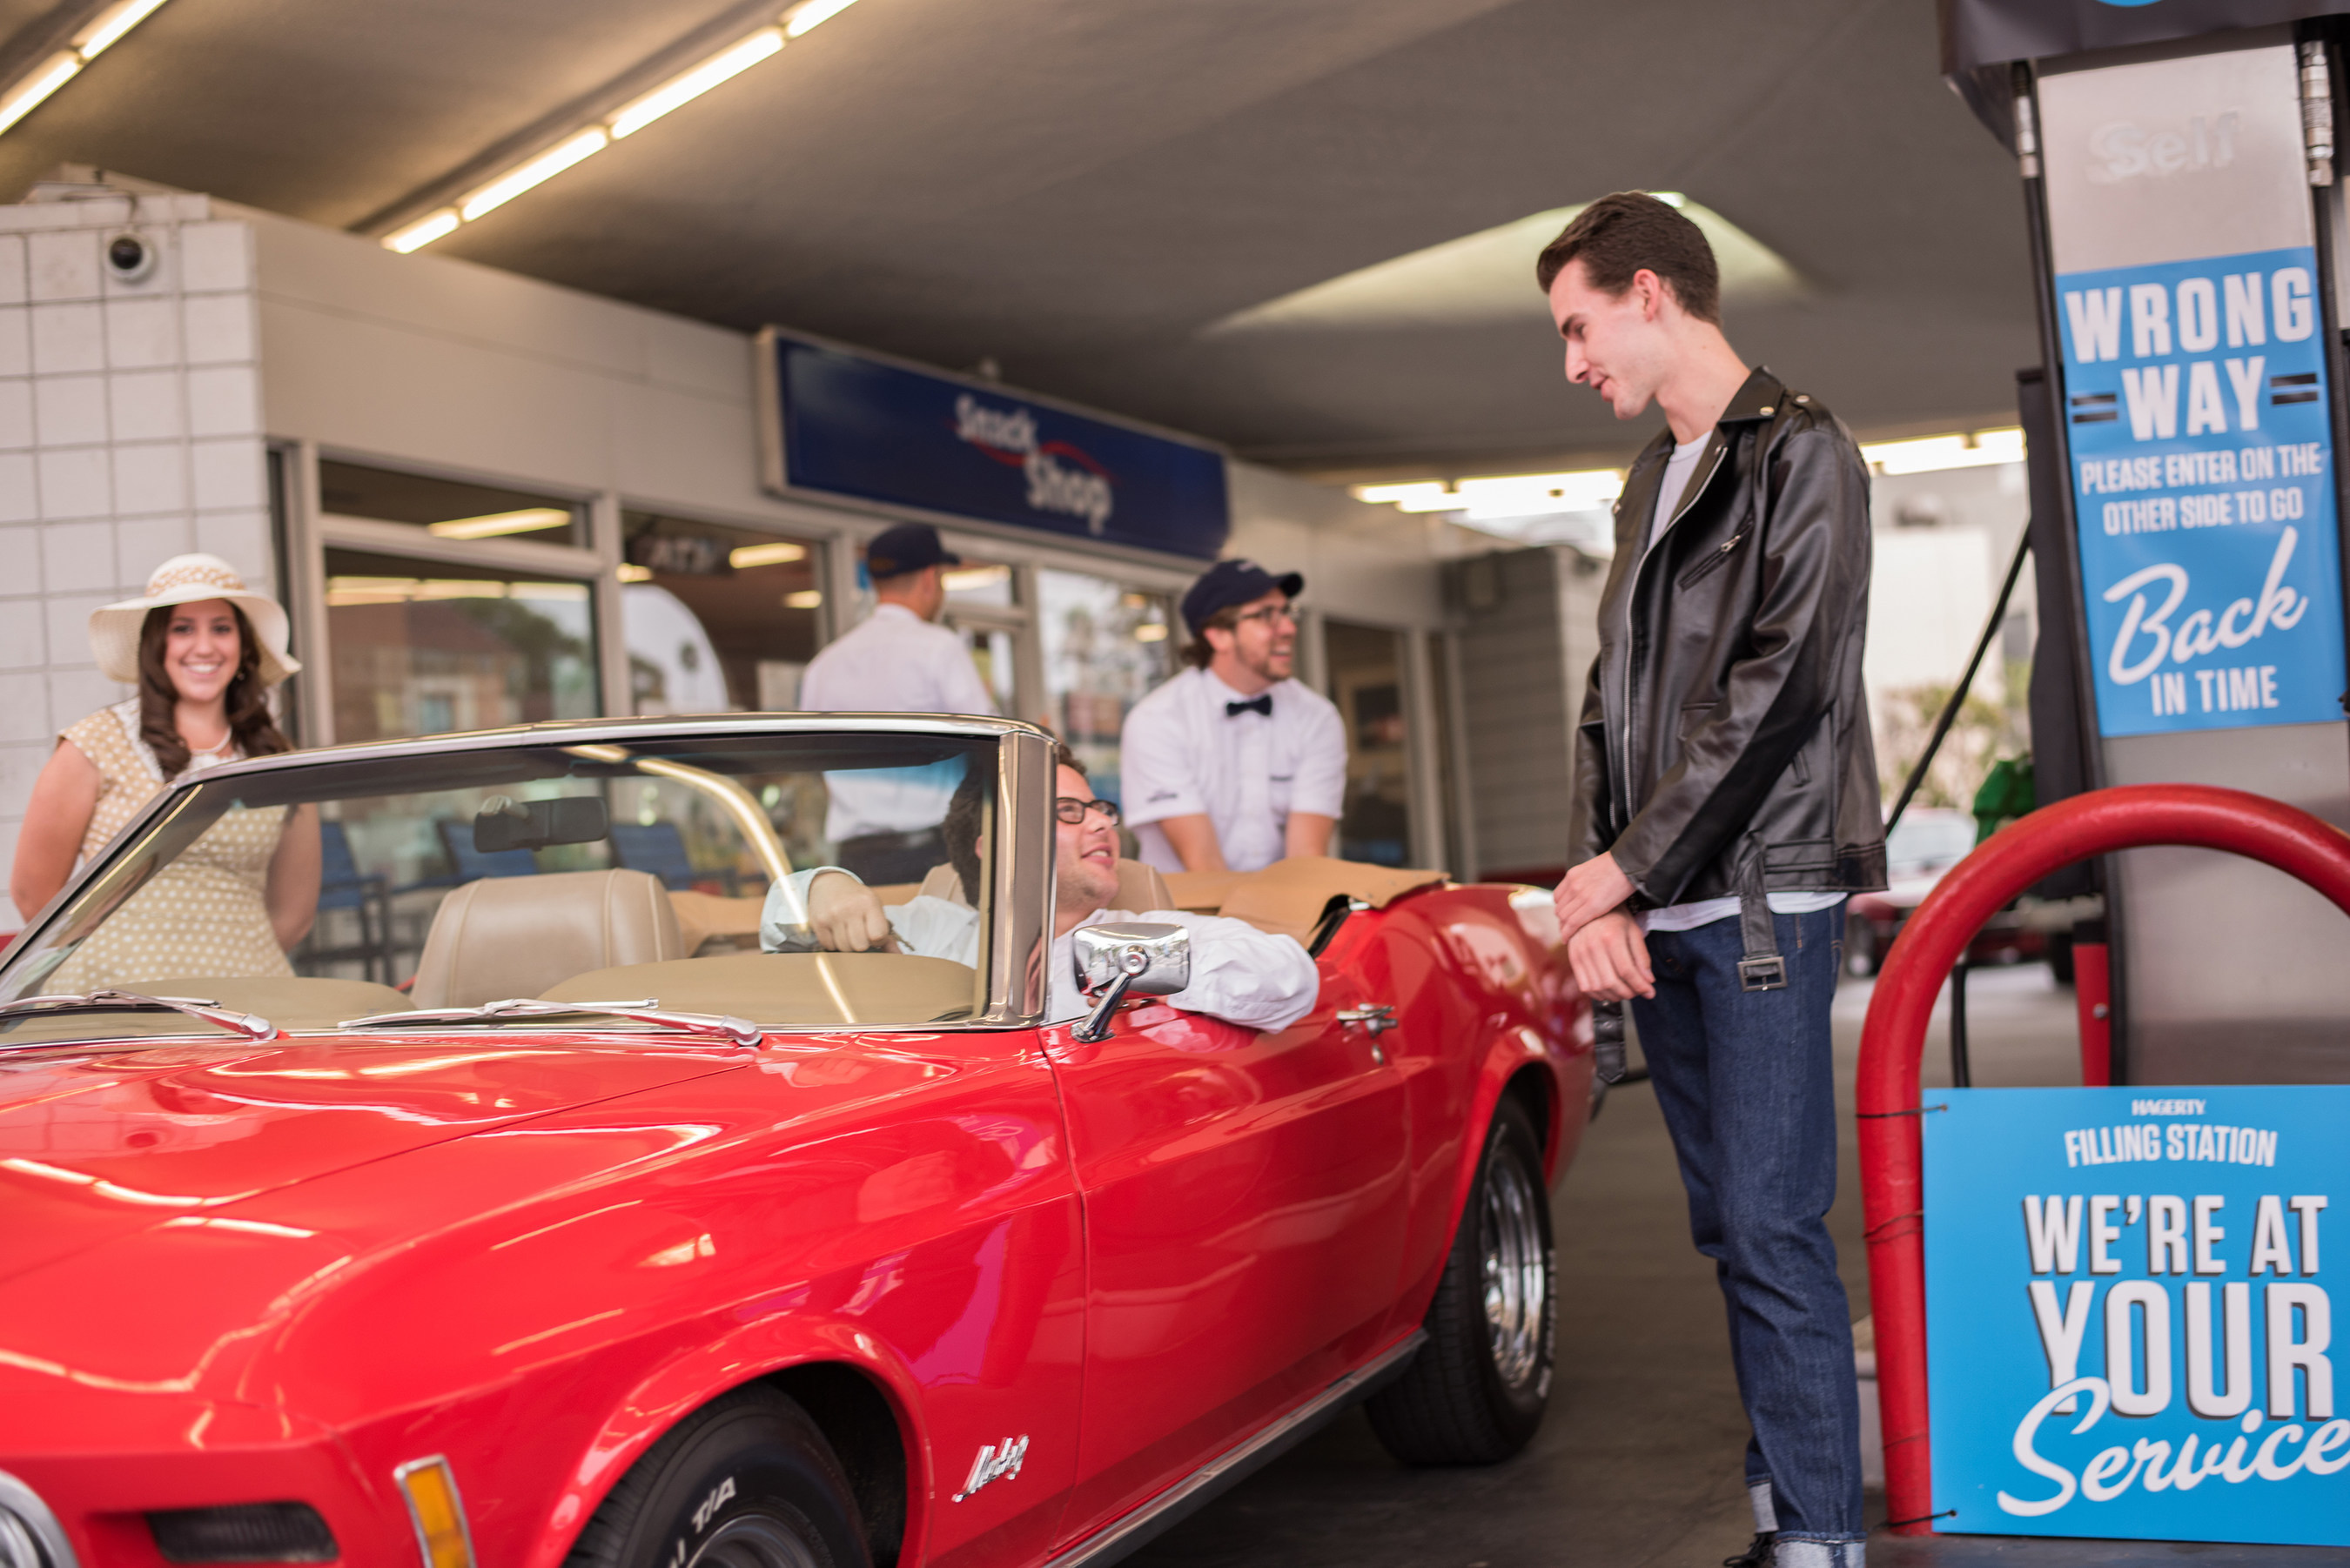 Jason Perls Miller, 28, of Culver City, CA with his 1970 Ford Mustang Convertible purchased gas for 35 cents a gallon during the Hagerty vintage gas station event celebrating National Collector Car Appreciation Day.